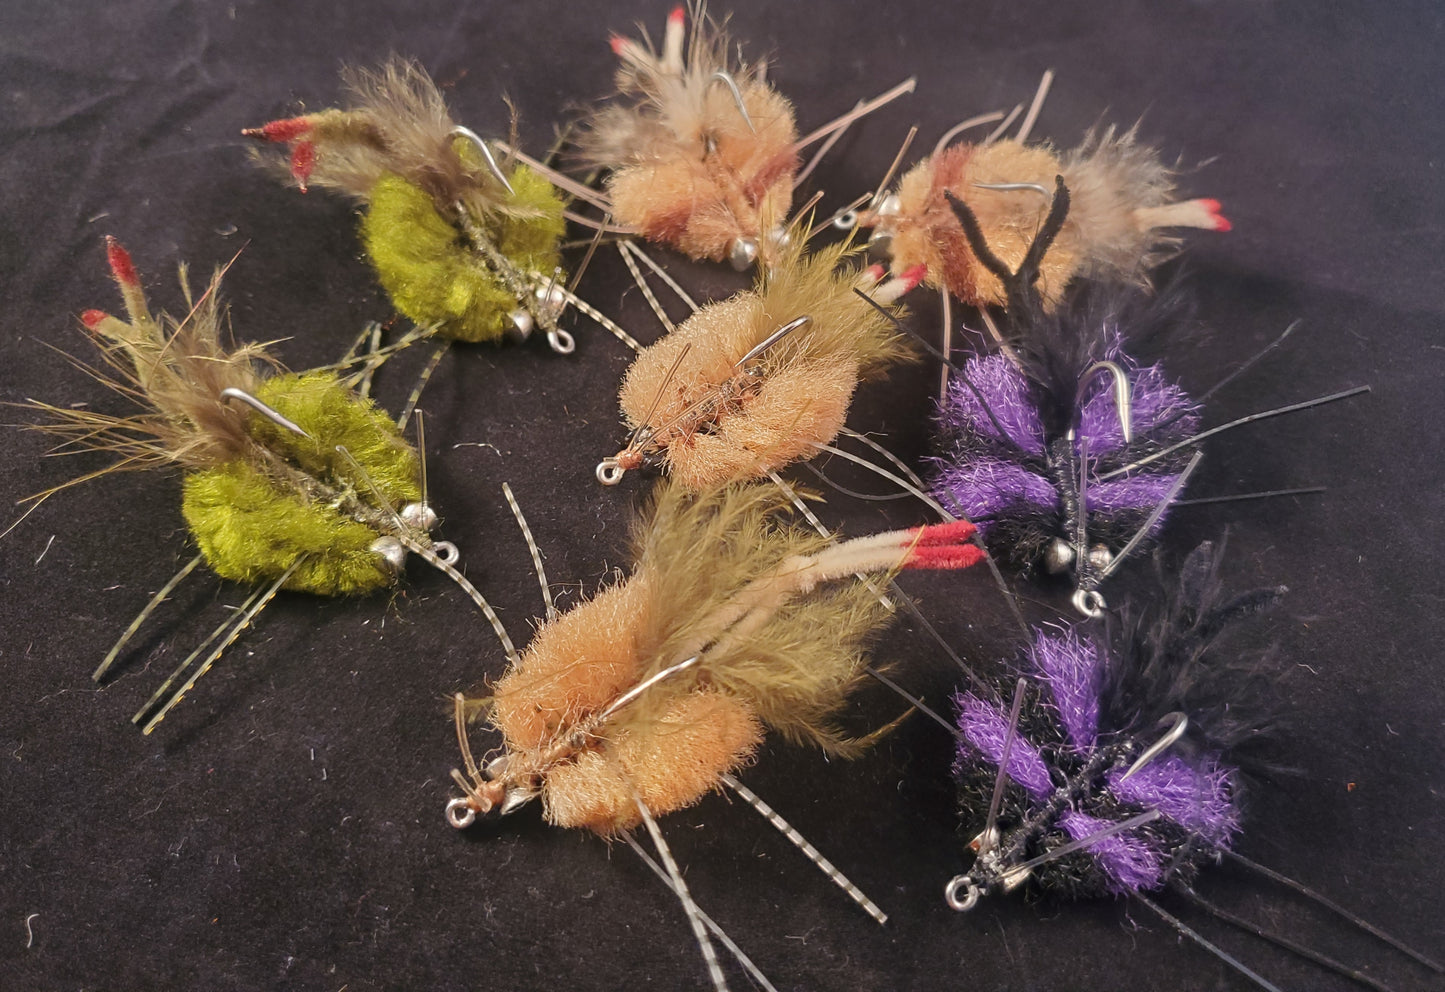 Strong Arm Crab, Permit Fly, Bonefish Fly, Crab Fly, Merkin Crab